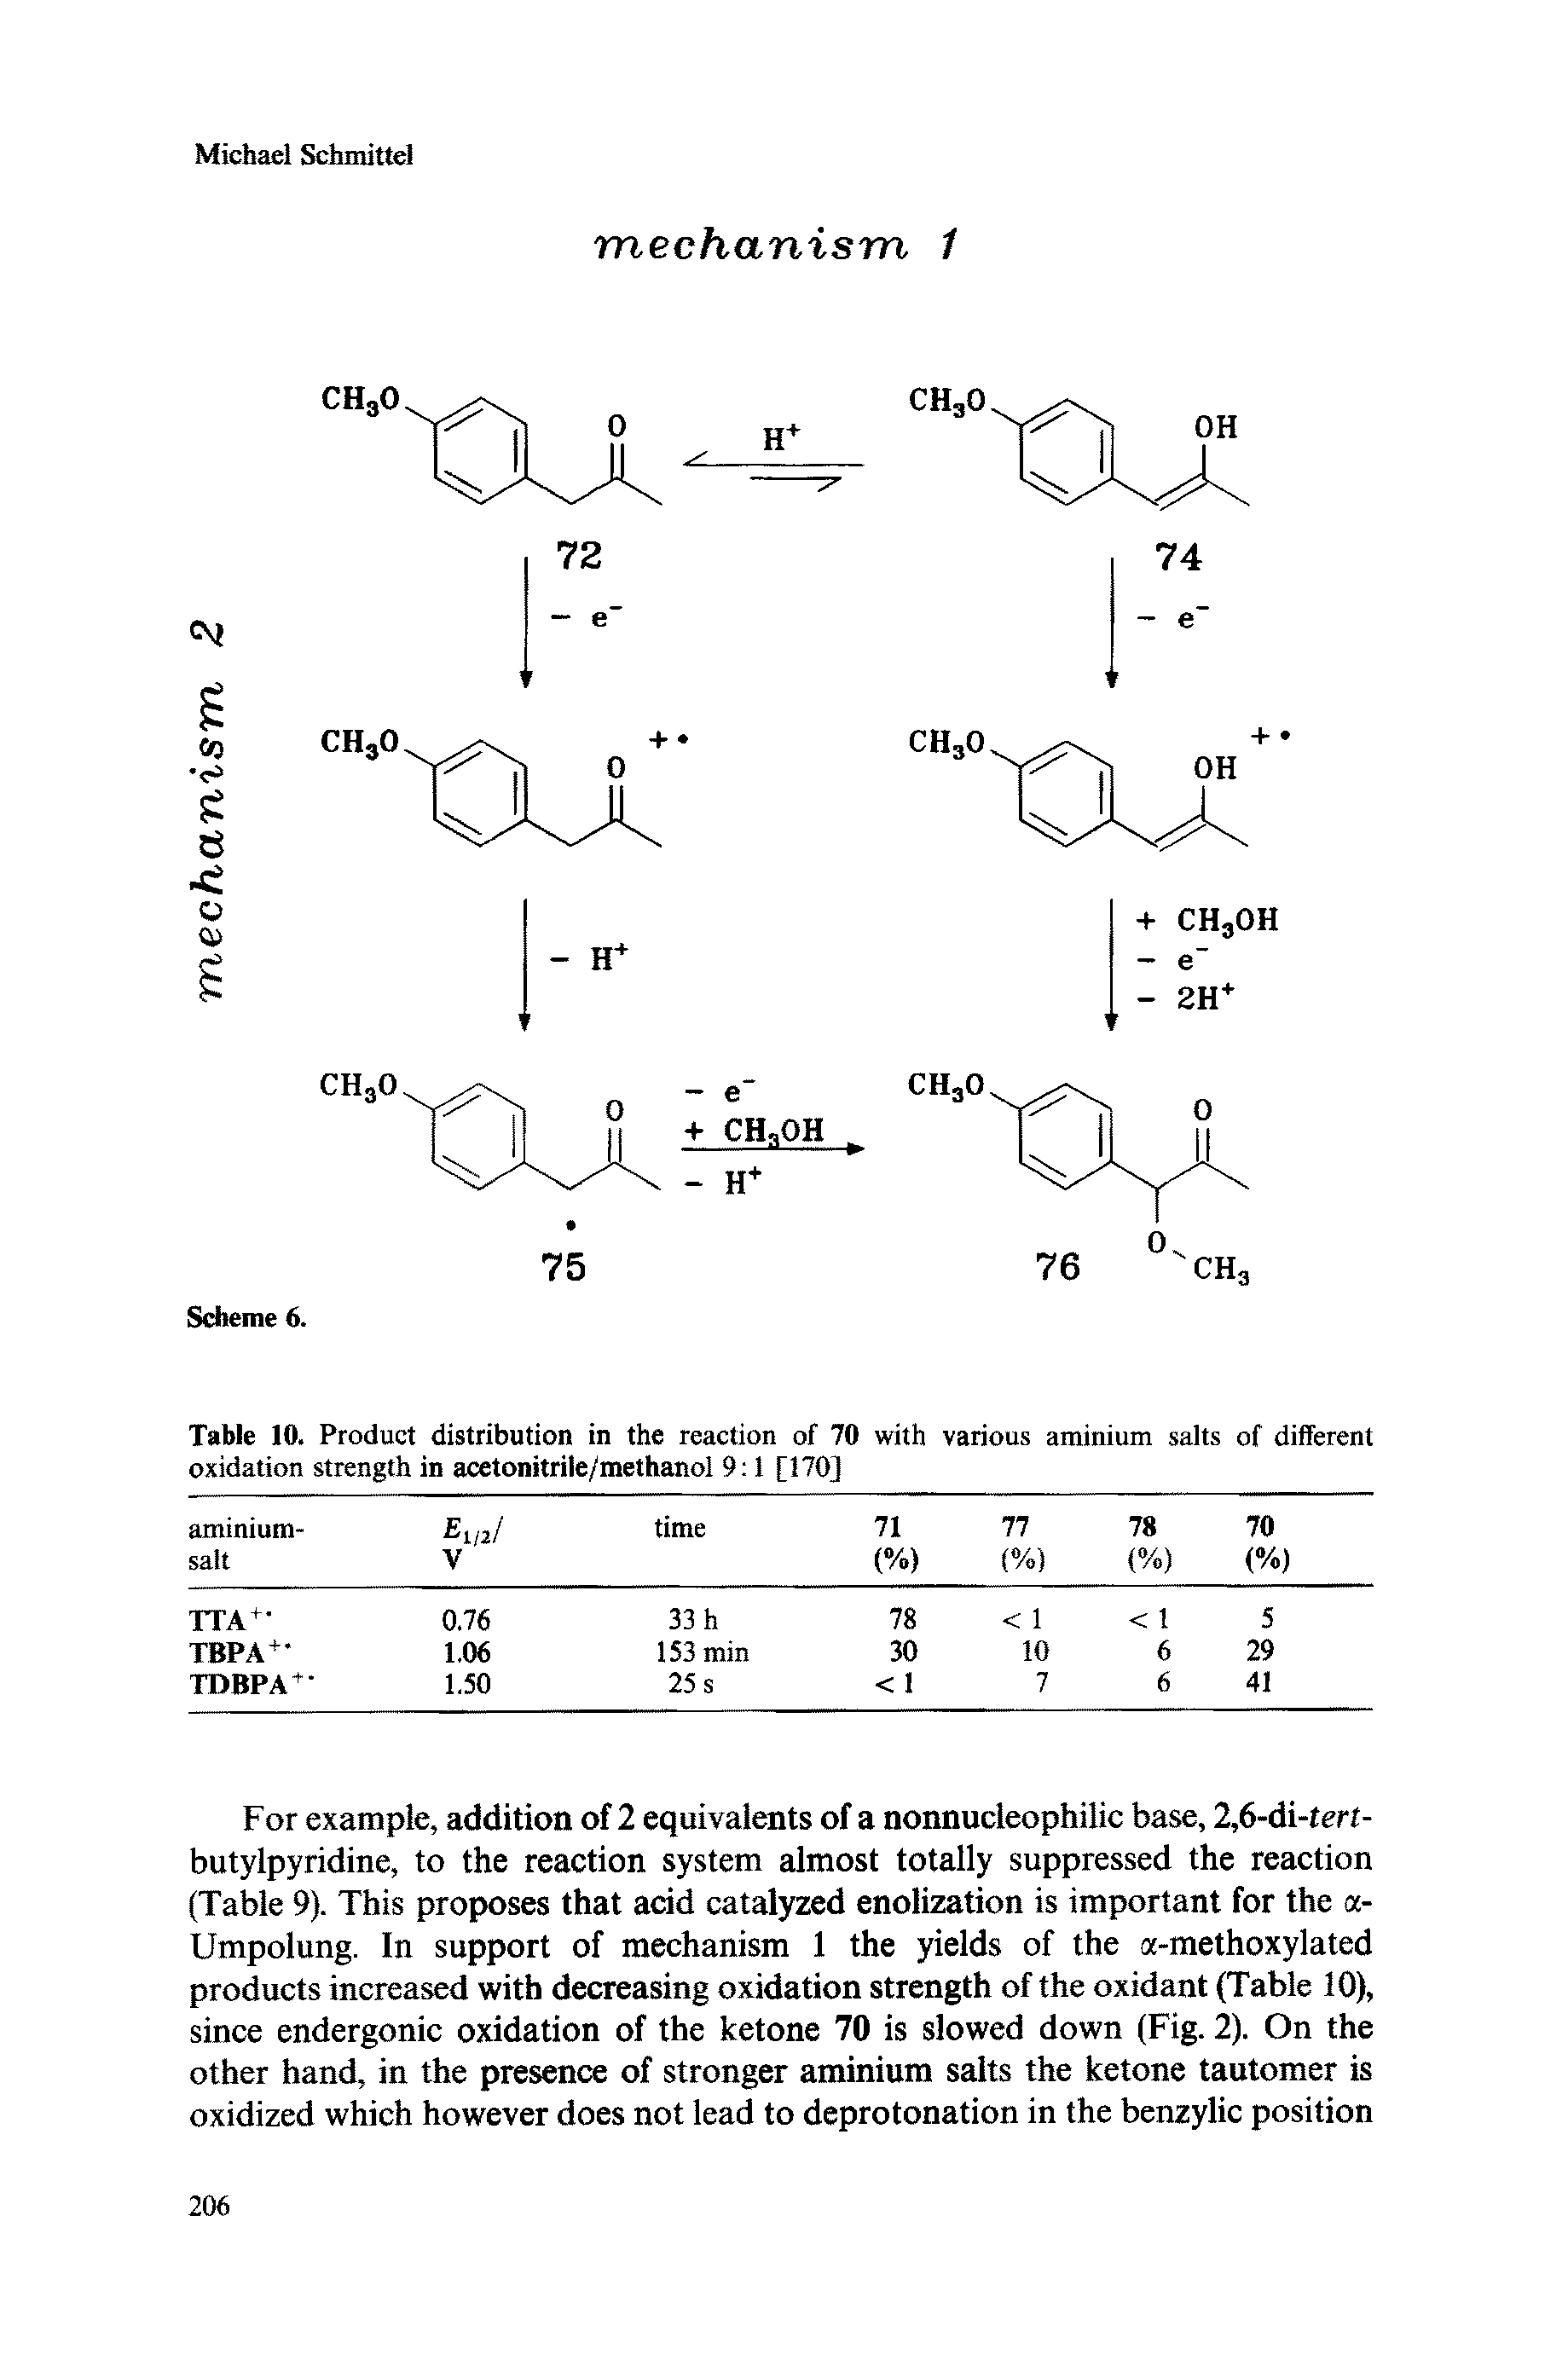 Table 10. Product distribution in the reaction of 70 with various aminium salts of different oxidation strength in acetonitrile/methanol 9 1 [170]...